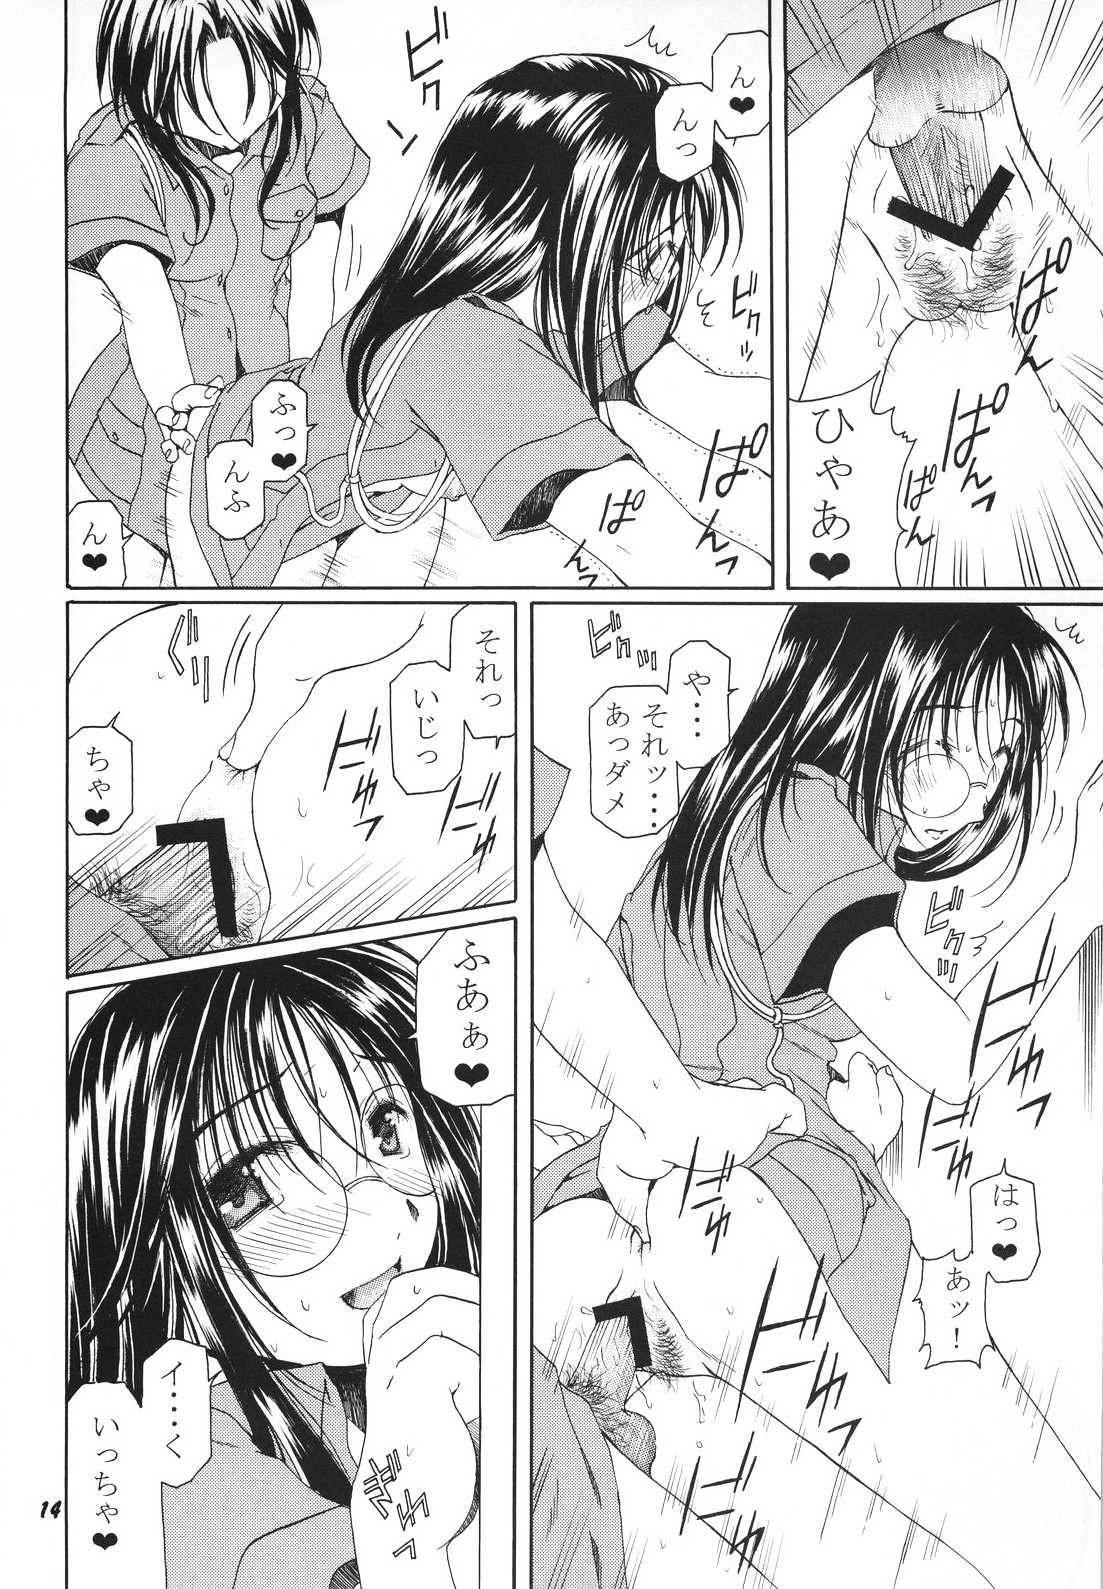 [Mechanical Code (Takahashi Kobato)] method to the madness 3 (You're Under Arrest!) page 13 full